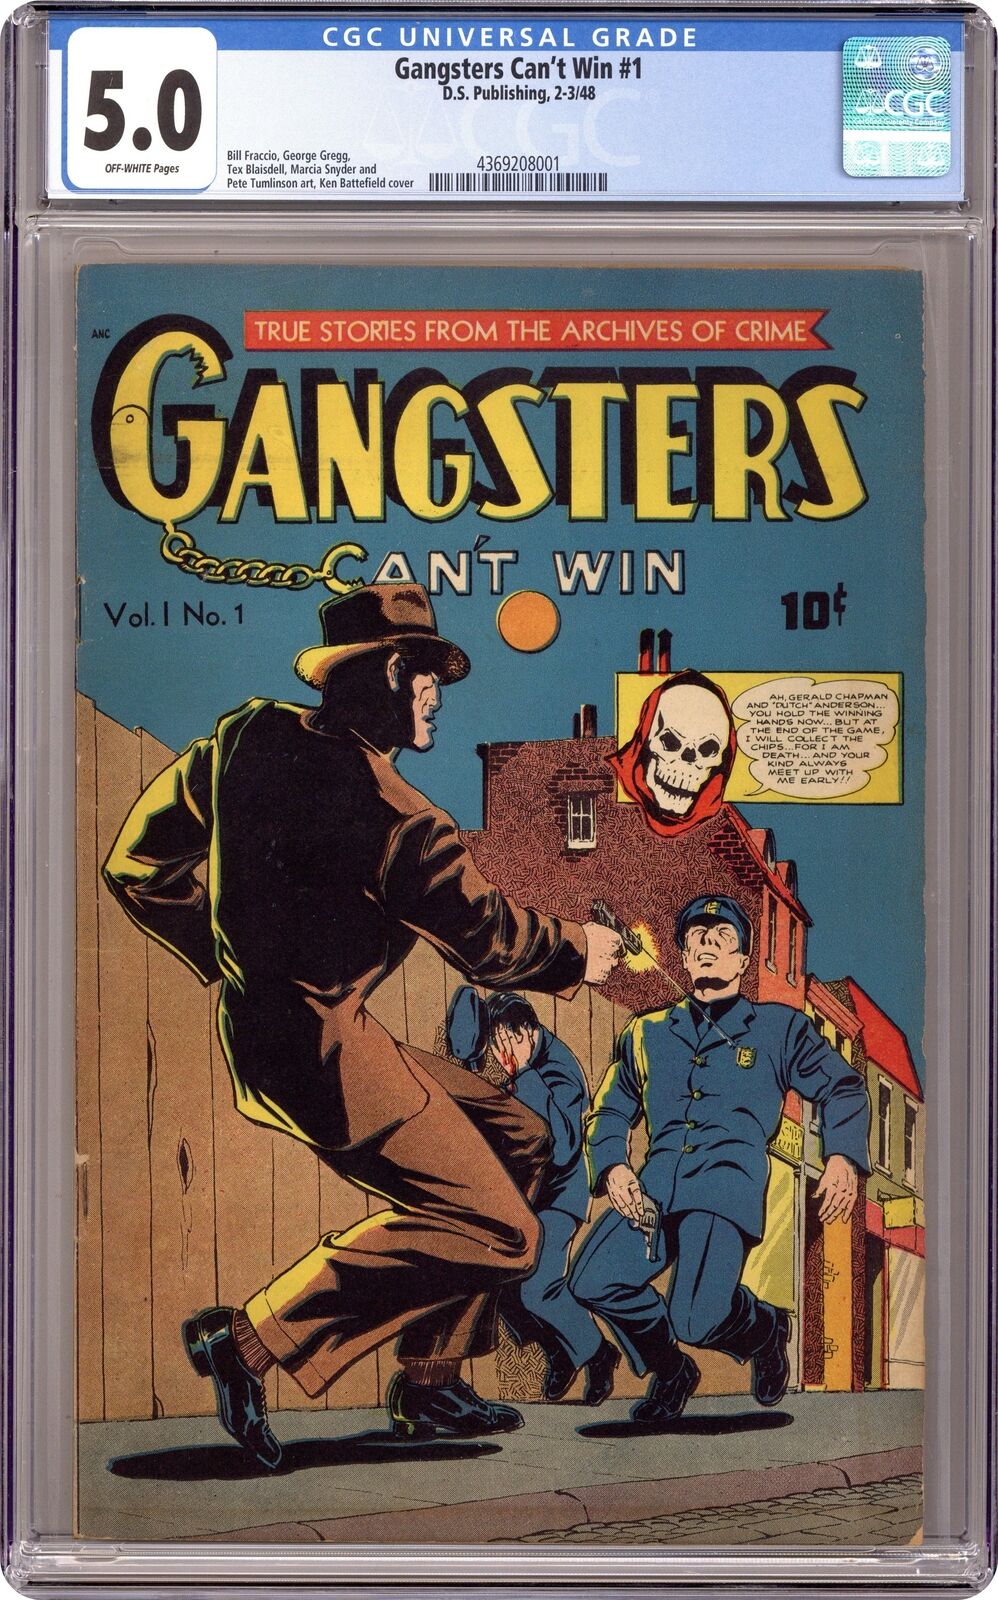 Gangsters Can't Win #1 CGC 5.0 1948 4369208001